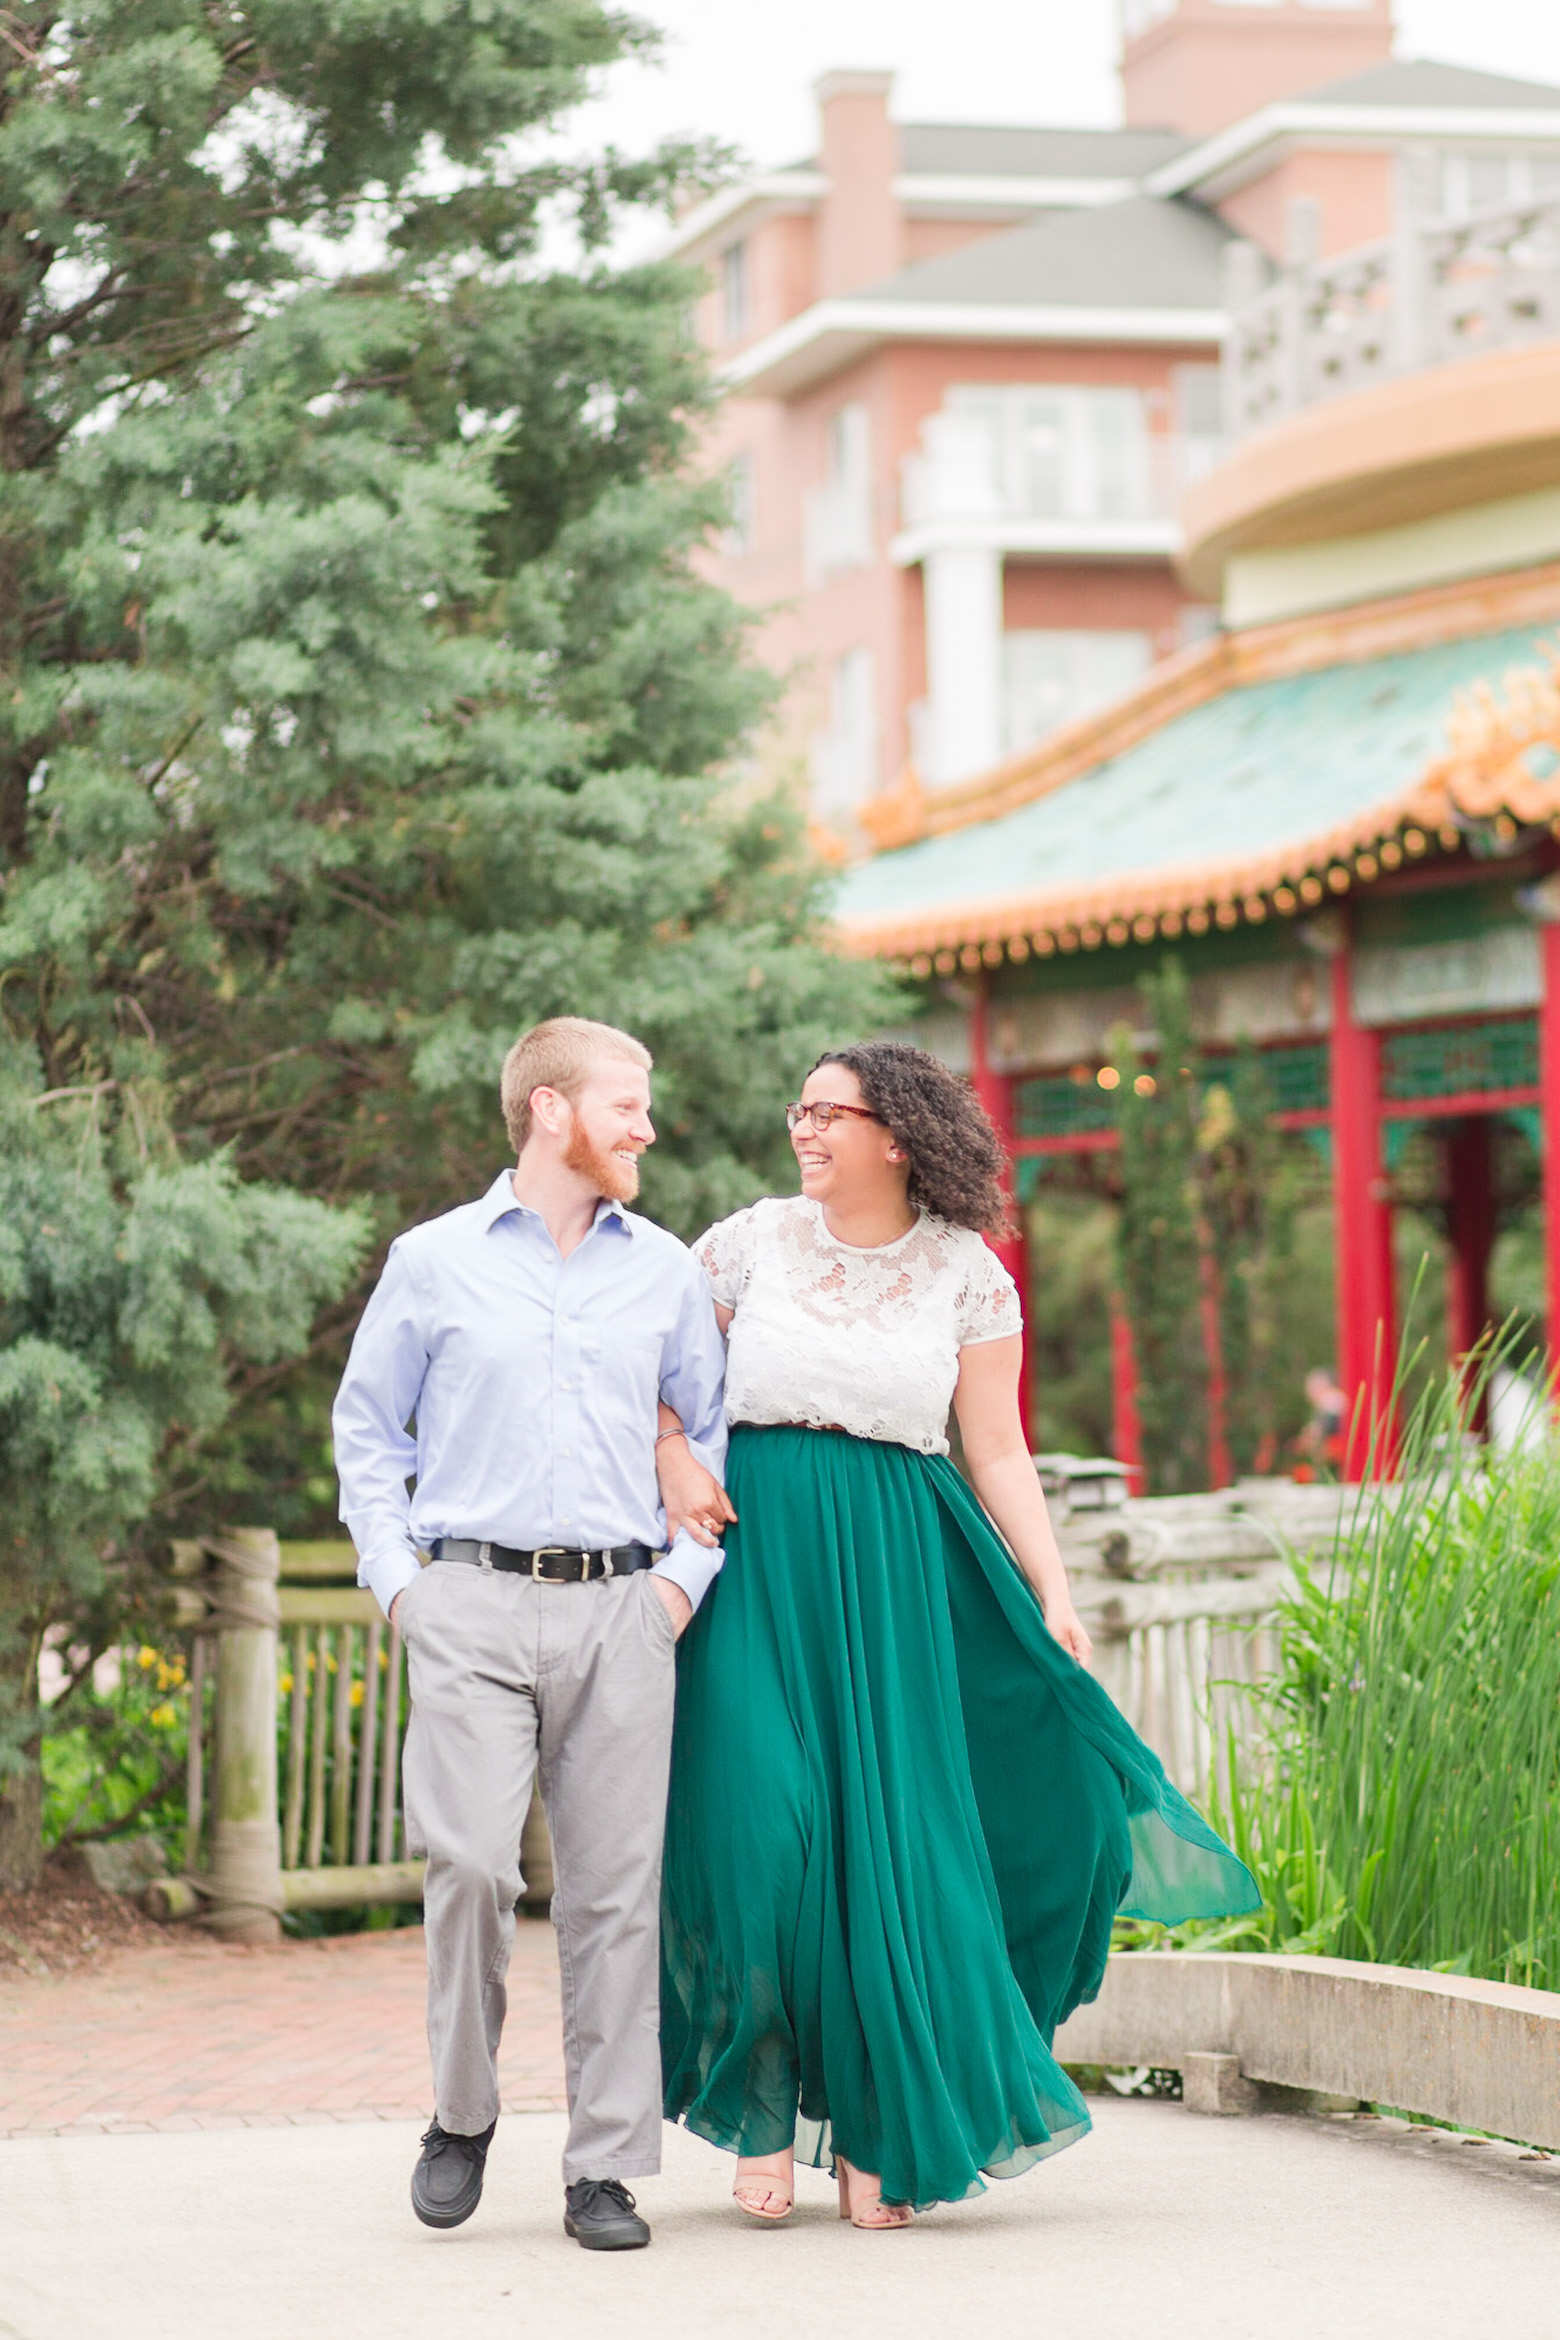 Norfolk Pagoda Engagement Photography by Angie McPherson Photography